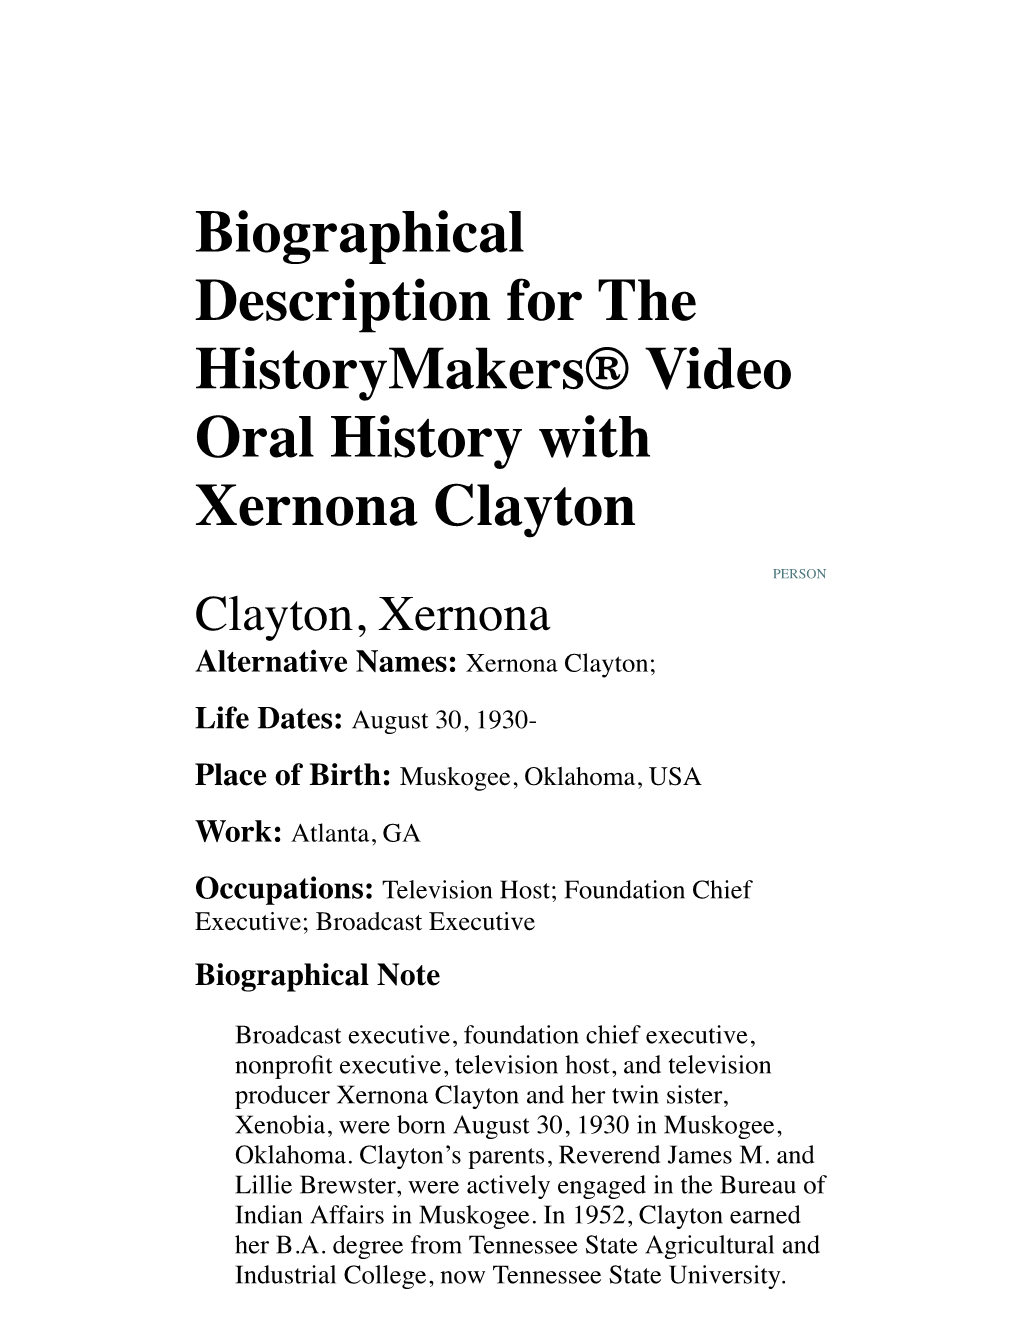 Biographical Description for the Historymakers® Video Oral History with Xernona Clayton